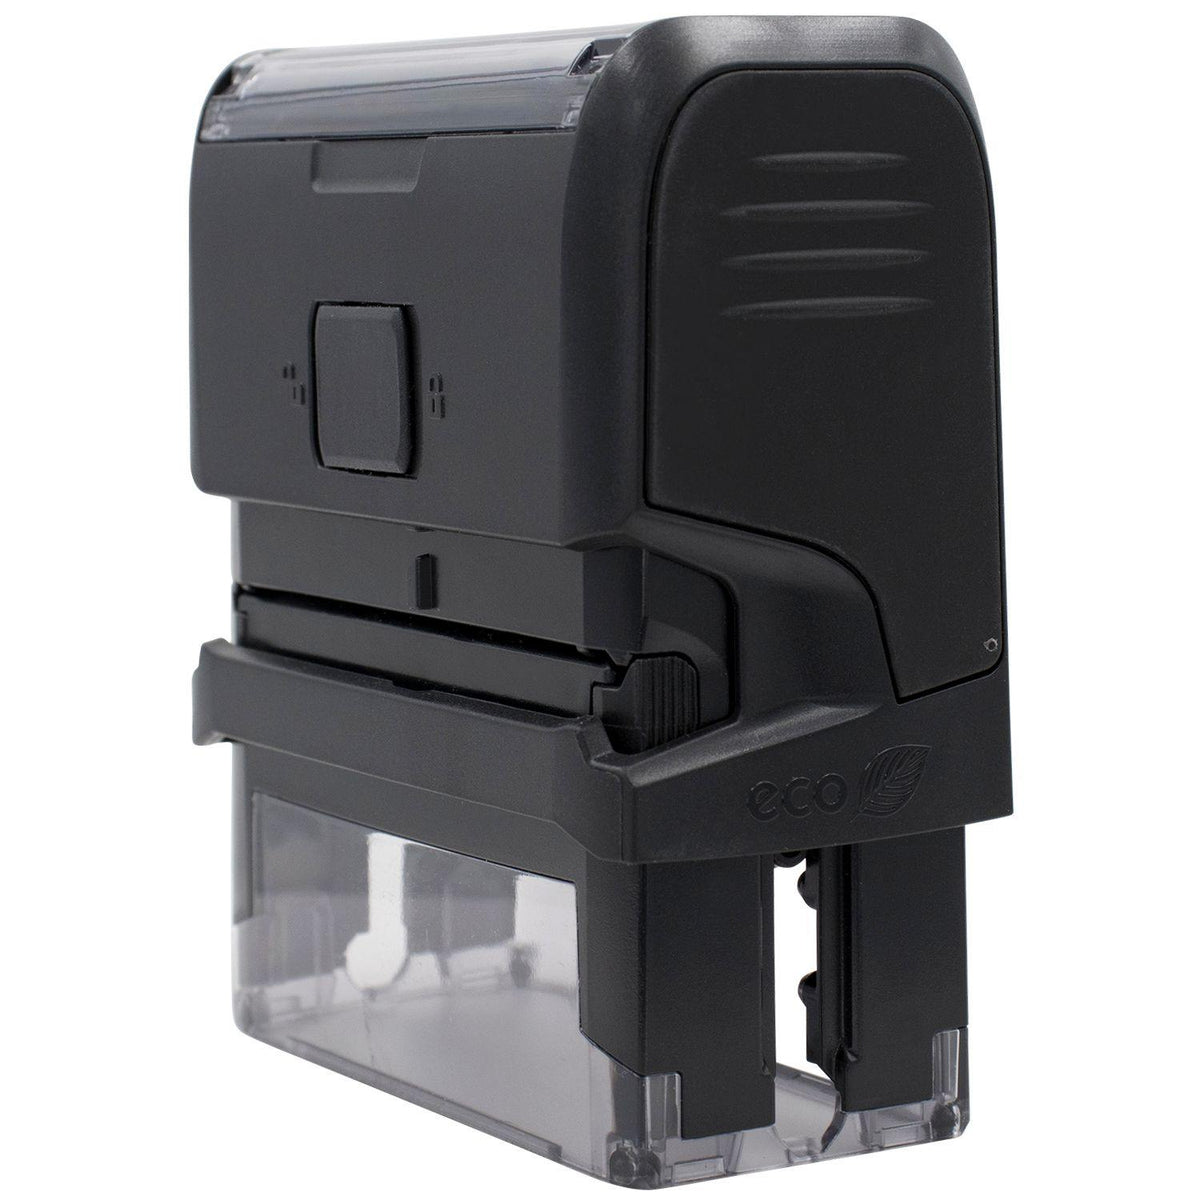 Large Self Inking Secondary Insurance Stamp - Engineer Seal Stamps - Brand_Trodat, Impression Size_Large, Stamp Type_Self-Inking Stamp, Type of Use_Medical Office